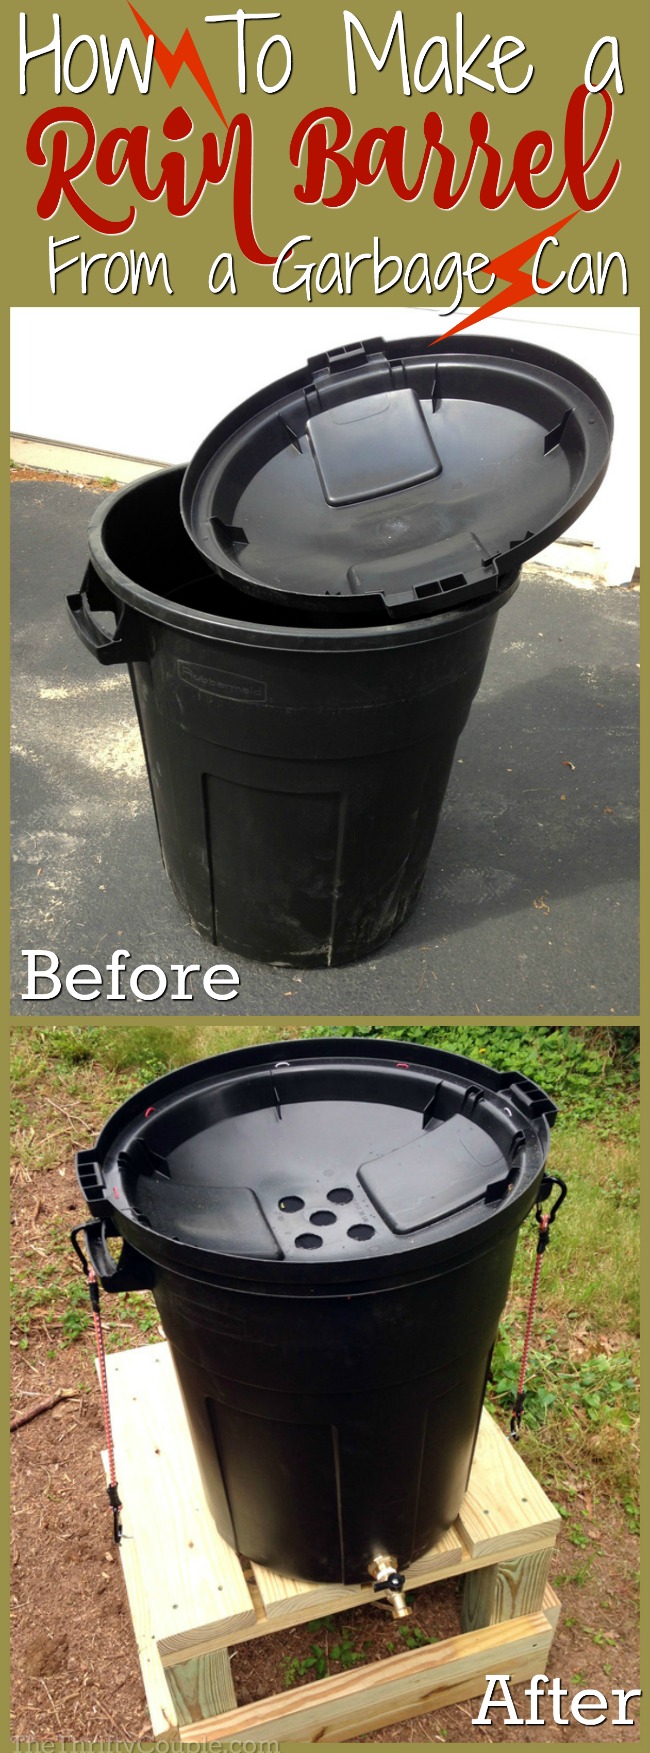 https://thethriftycouple.com/wp-content/uploads/2016/08/how-to-make-rain-barrel-from-garbage-can-before-after.jpg